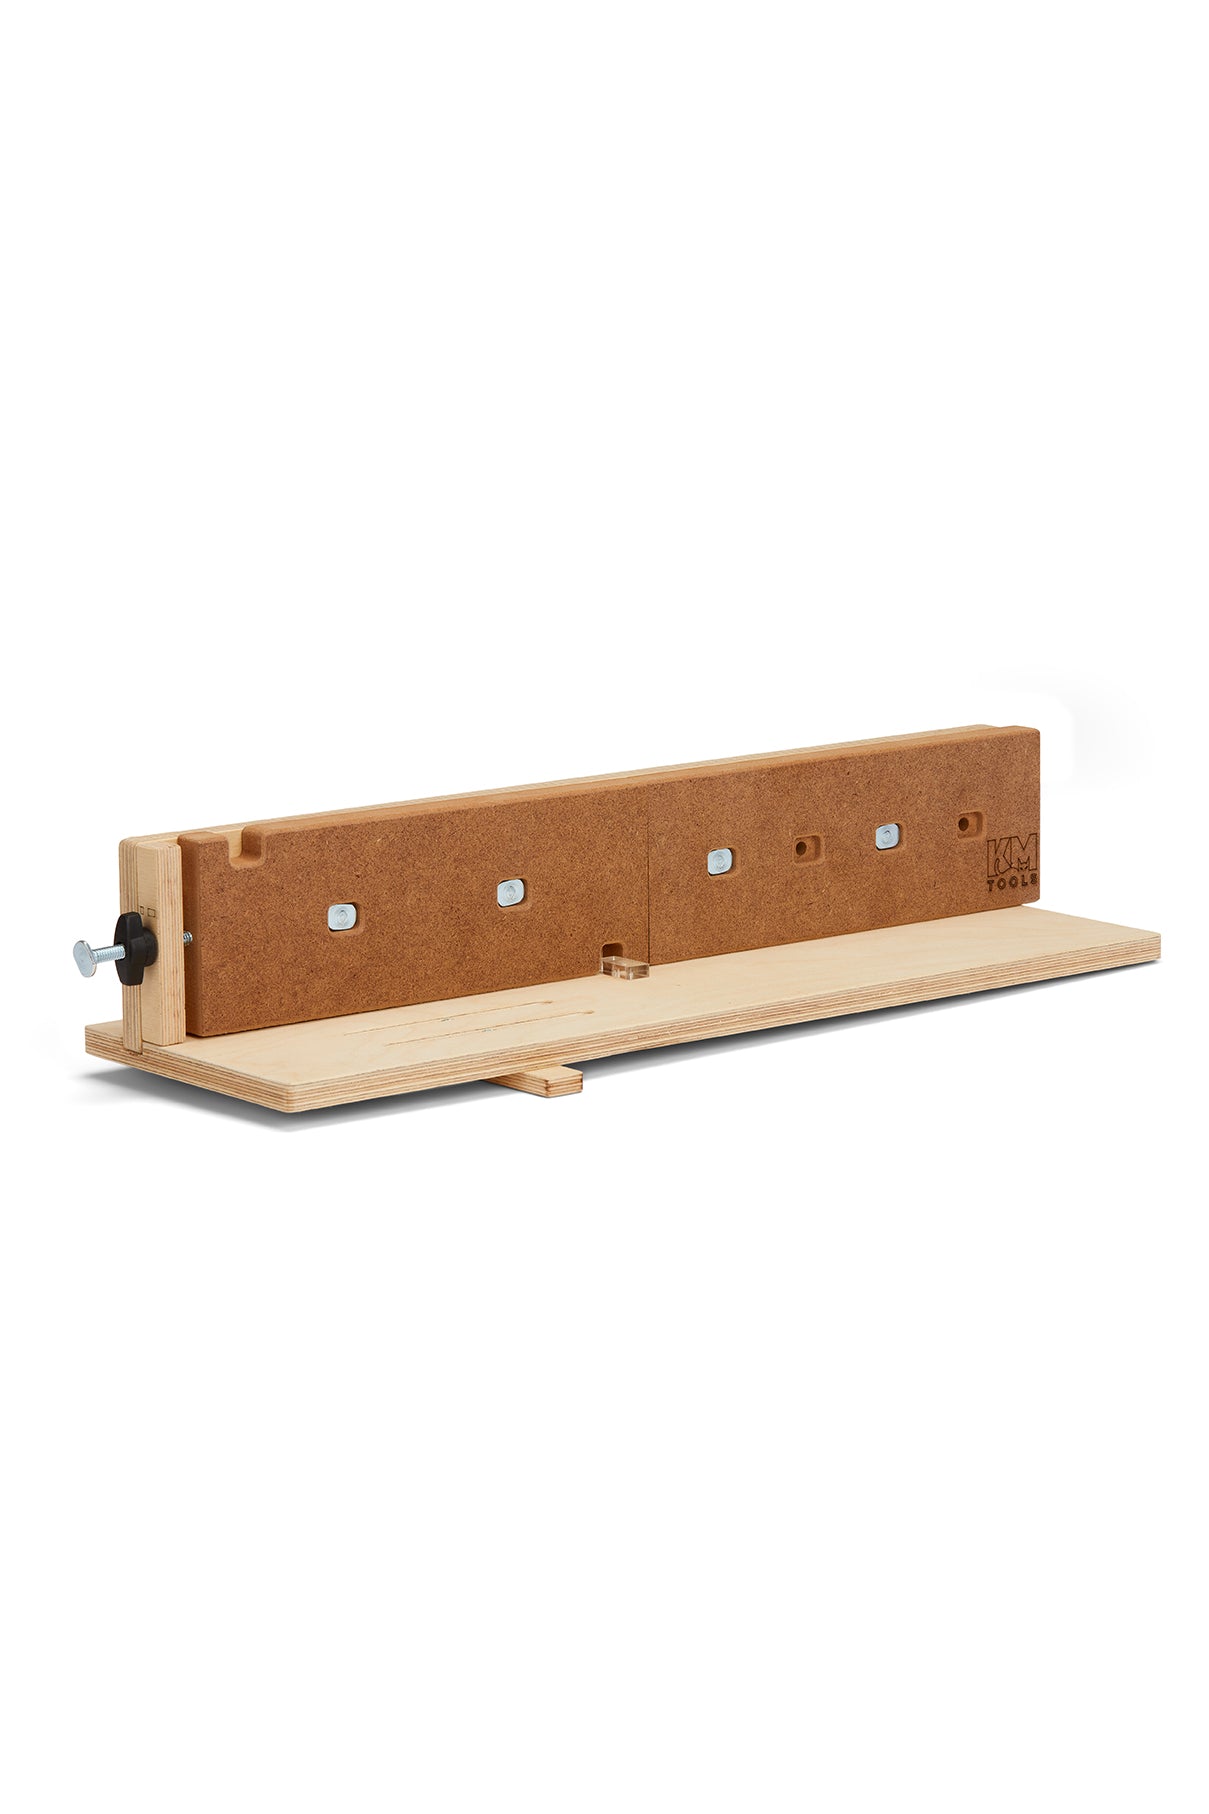 KM Tools Universal Box Joint Jig for Table Saws - *PRESALE*